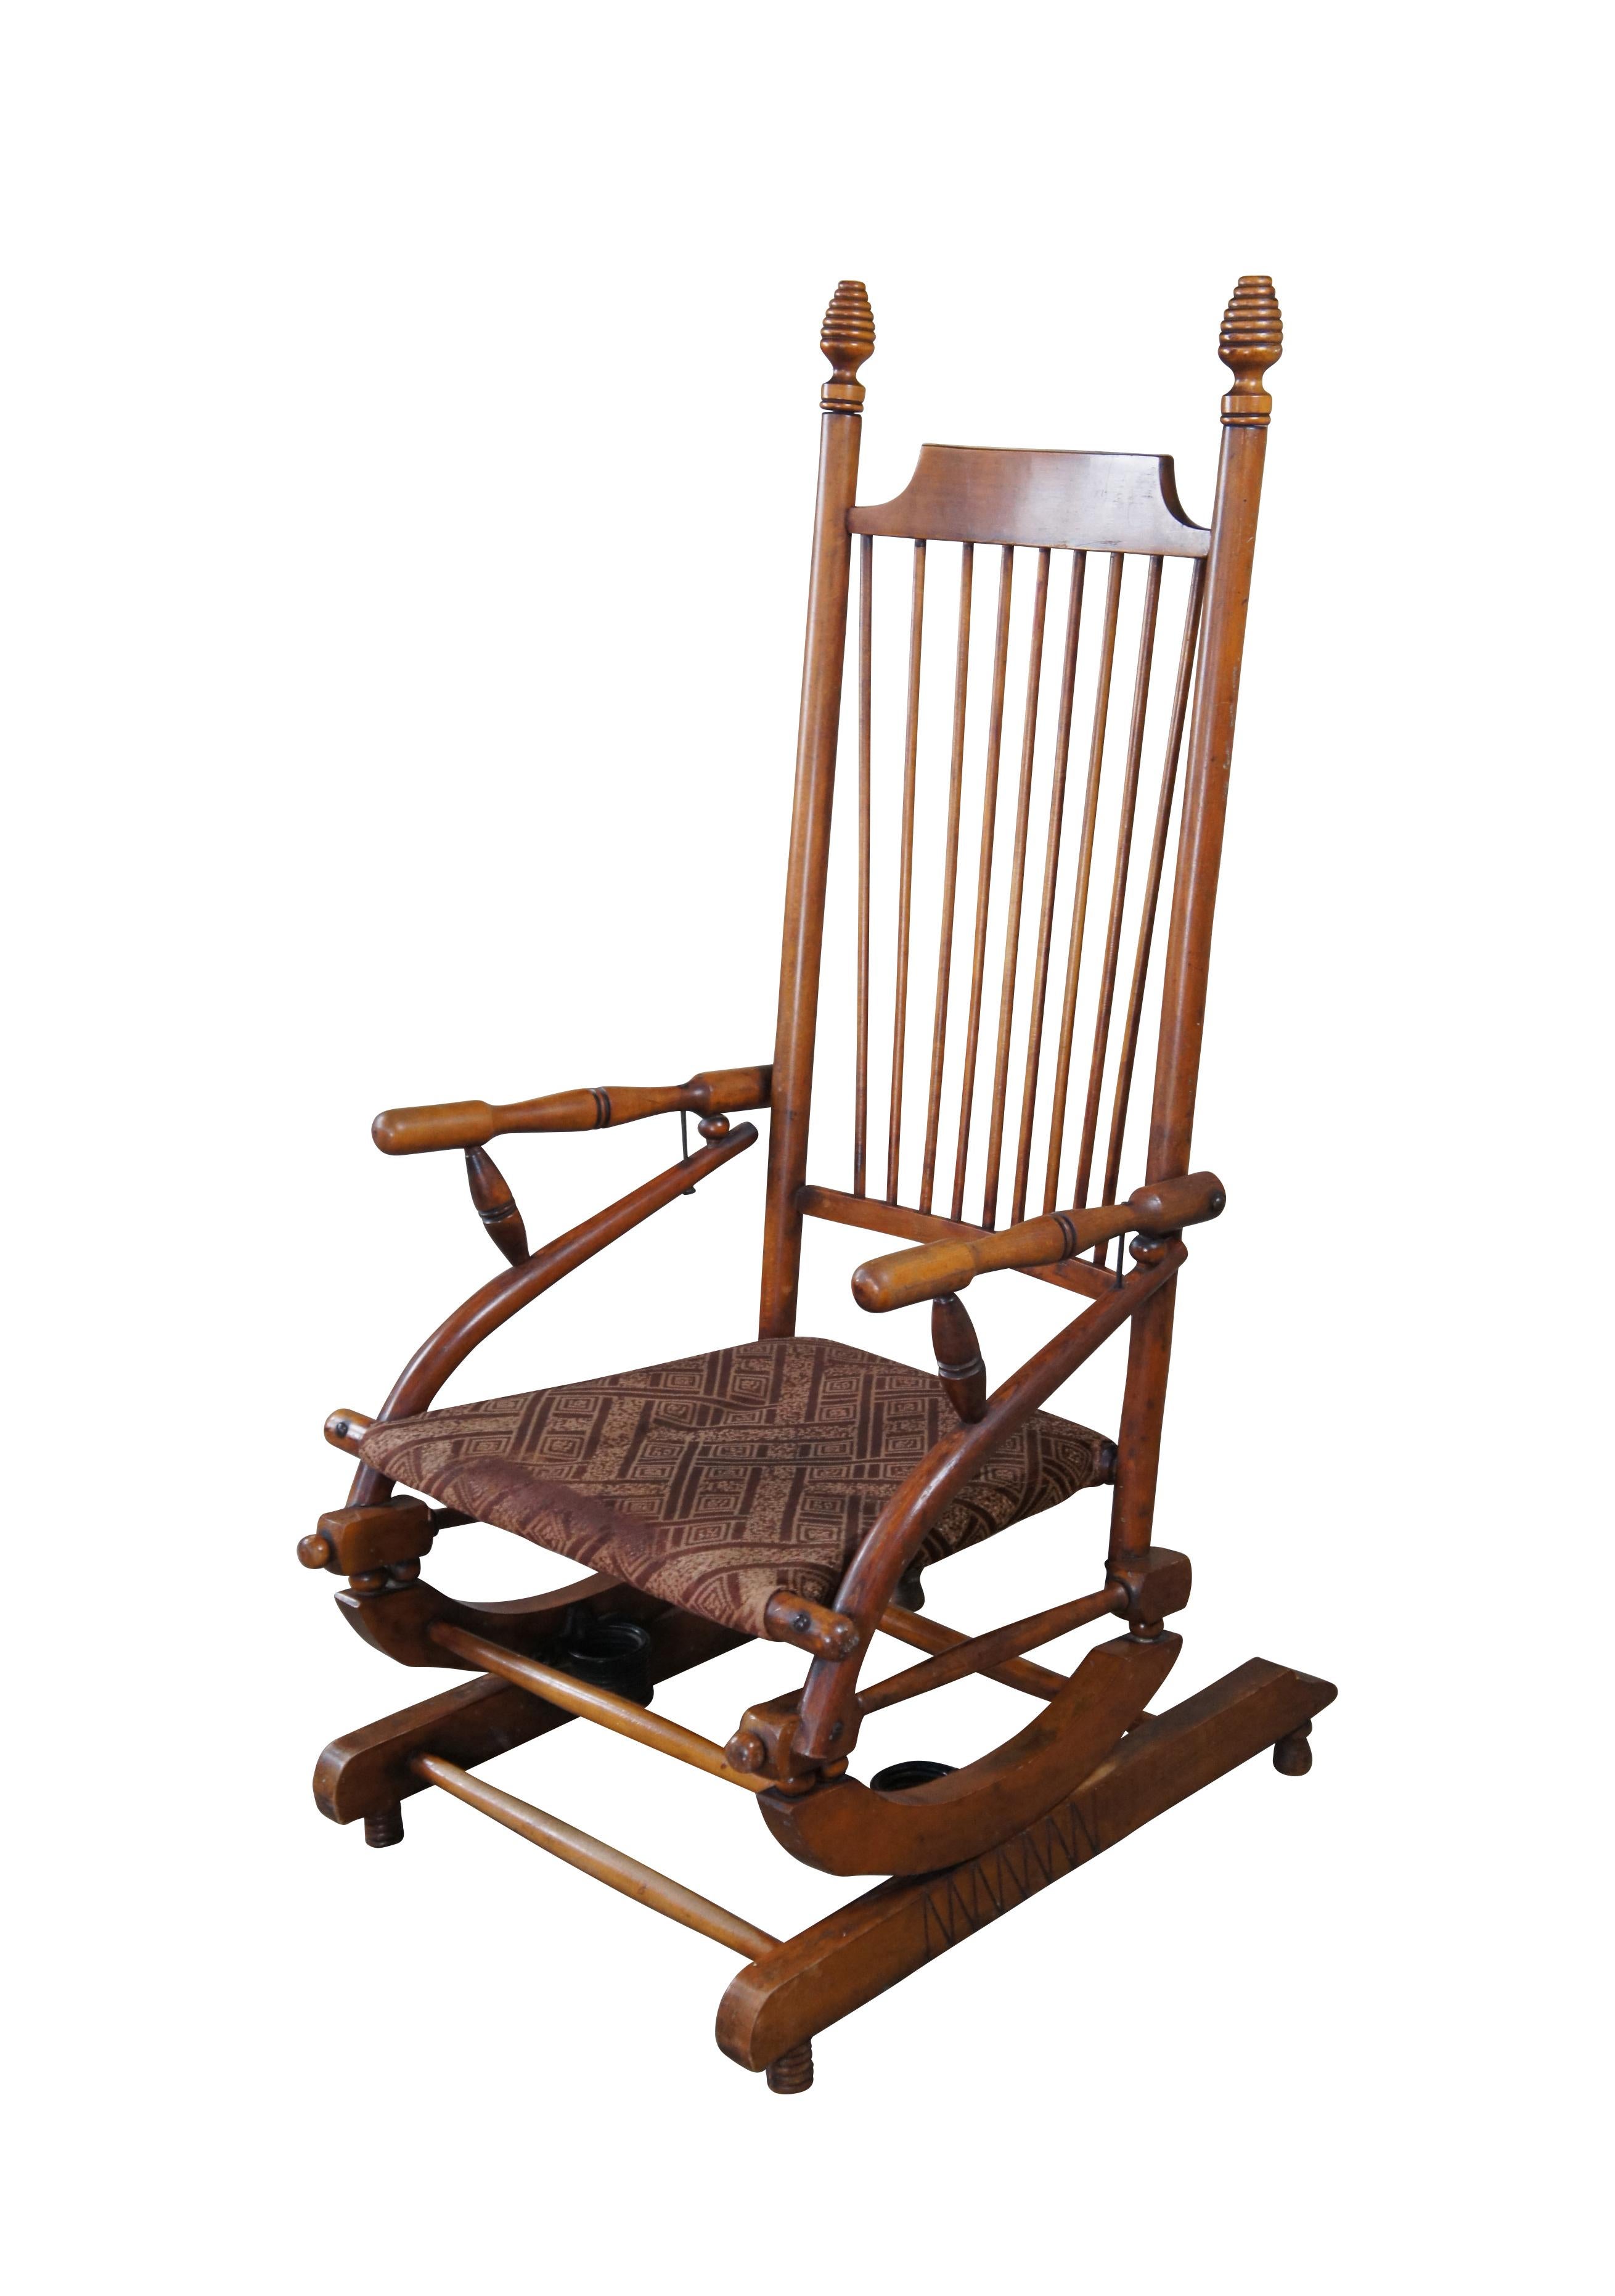 An intriguing Aesthetic Periiod platform rocking chair.  Made from oak with a spindled back, ribbed and graduated (beehive) finials, bentwood and turned arms and a cloth seat.  

Dimensions:
25